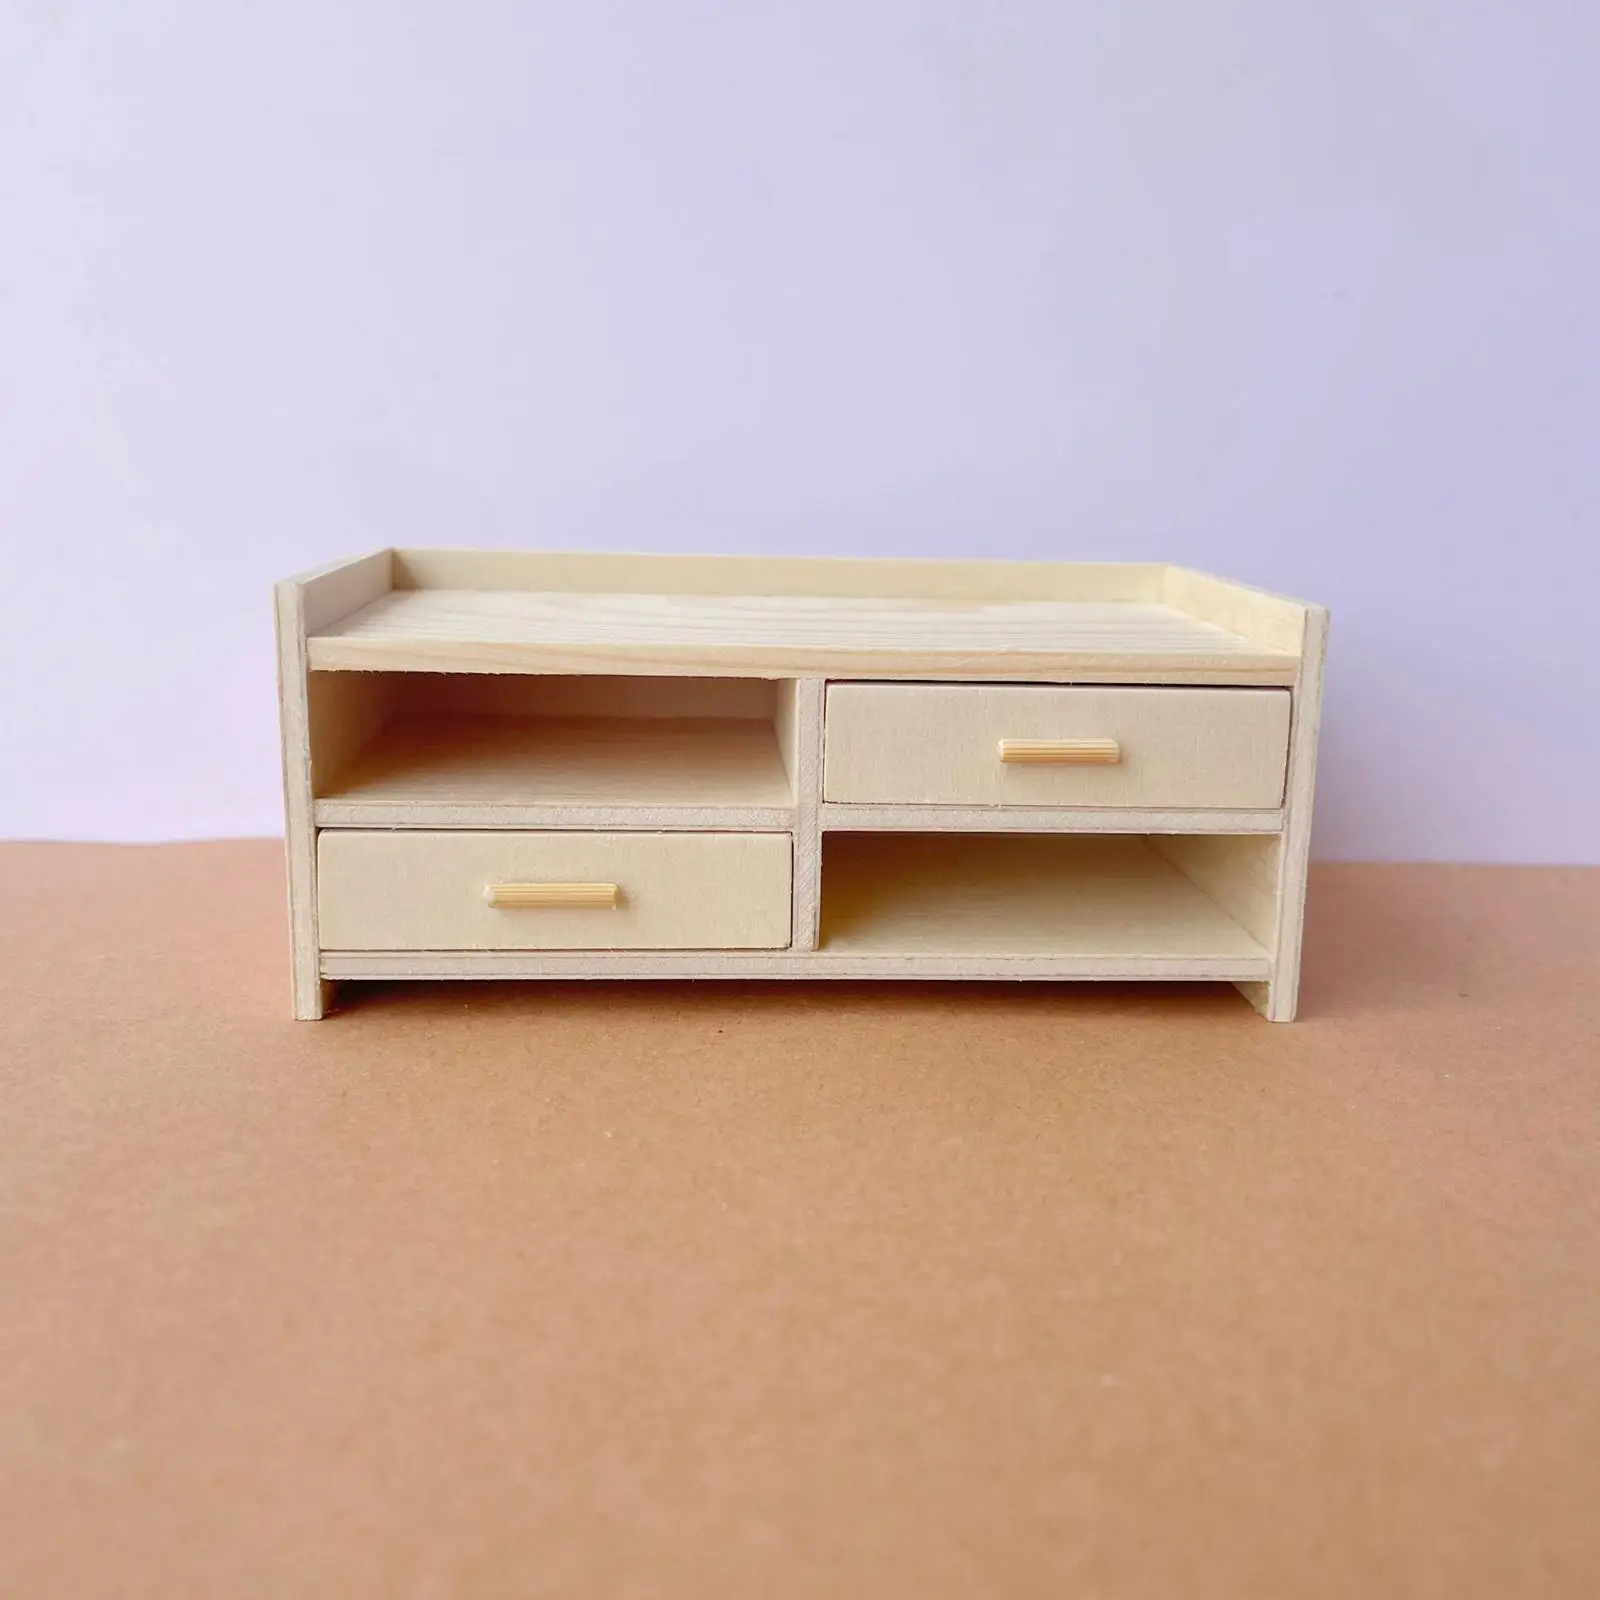 1:12 Scale Dollhouse TV Cabinet with Drawer Micro Landscape Scenery Supplies